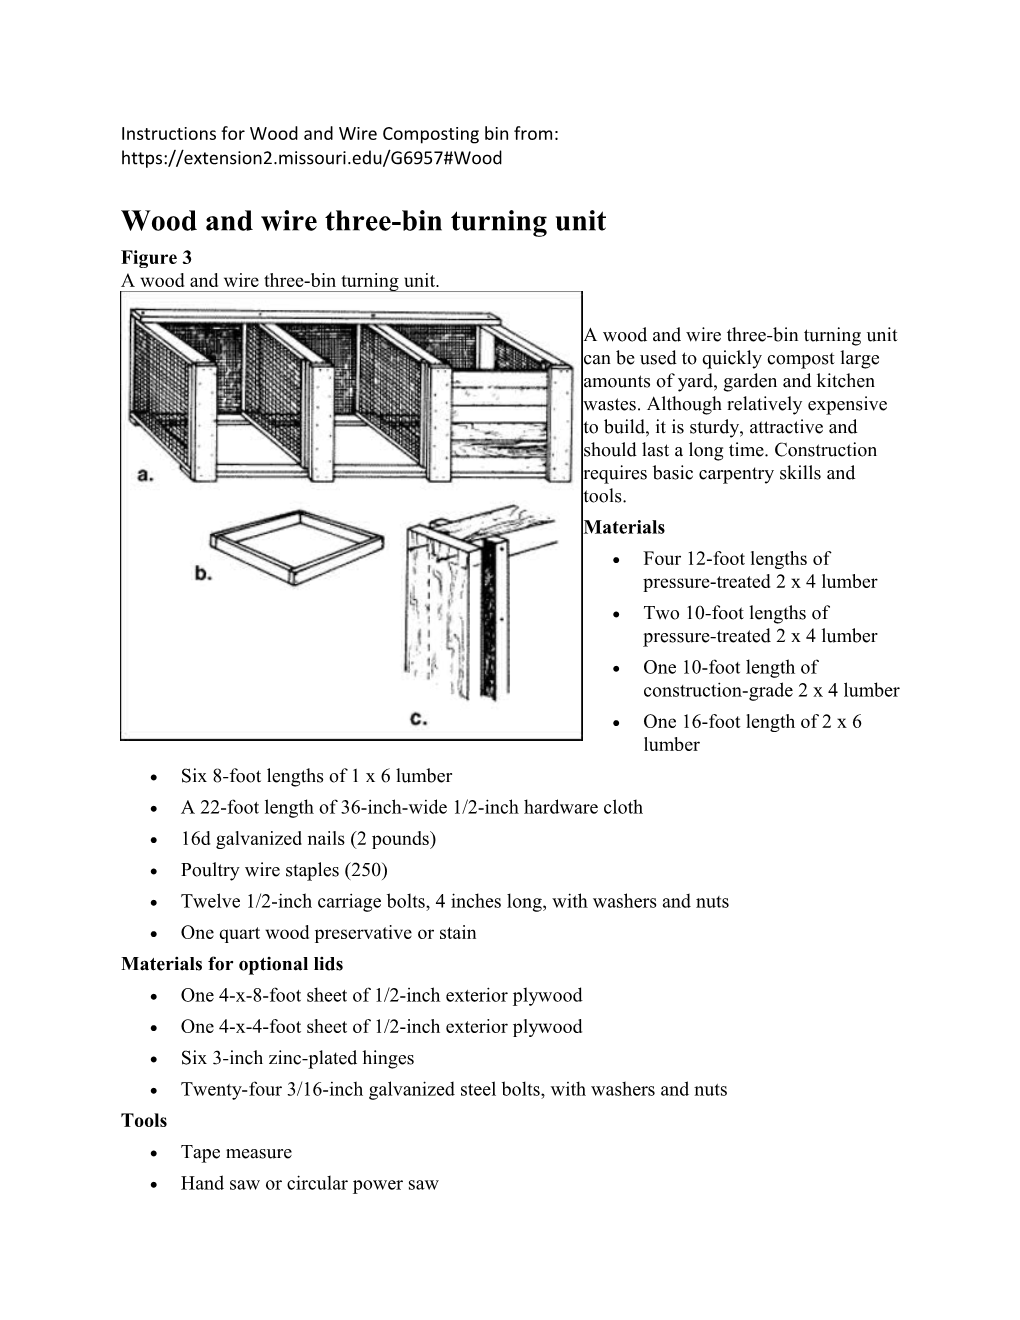 Instructions for Wood and Wire Composting Bin From